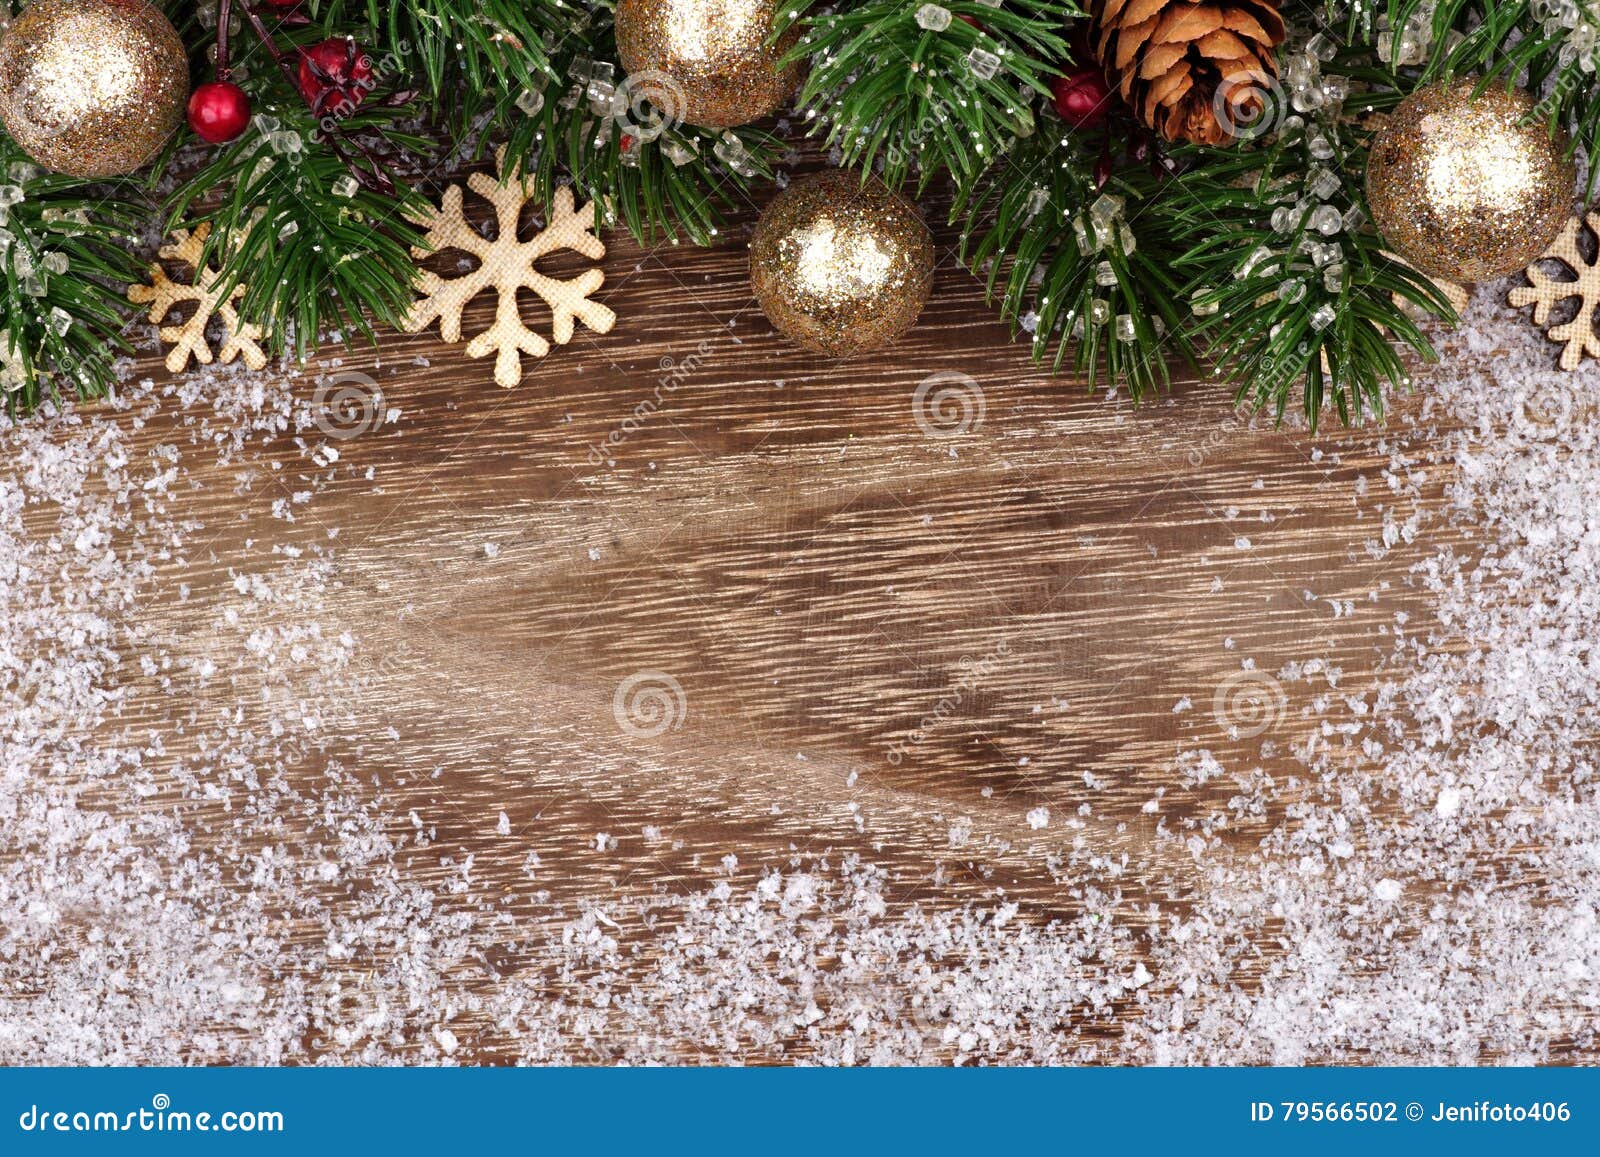 Christmas Top Border with Gold Ornaments, Branches and Snow Stock Photo ...